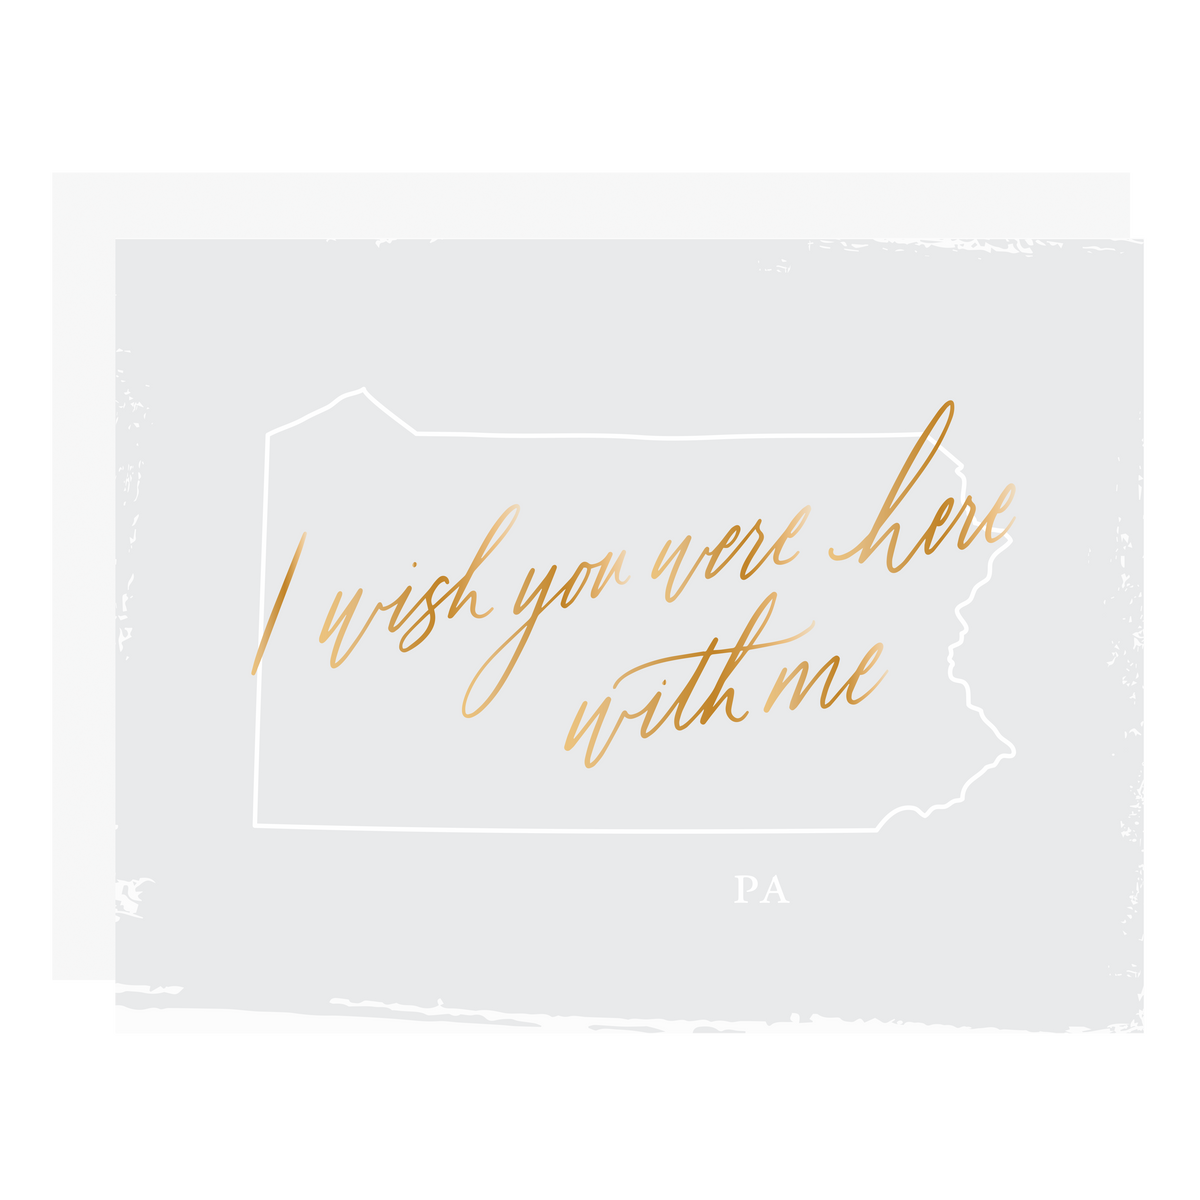 &quot;Wish You Were Here With Me - Pennsylvania&quot;, letterpress printed by hand with gold foil. 